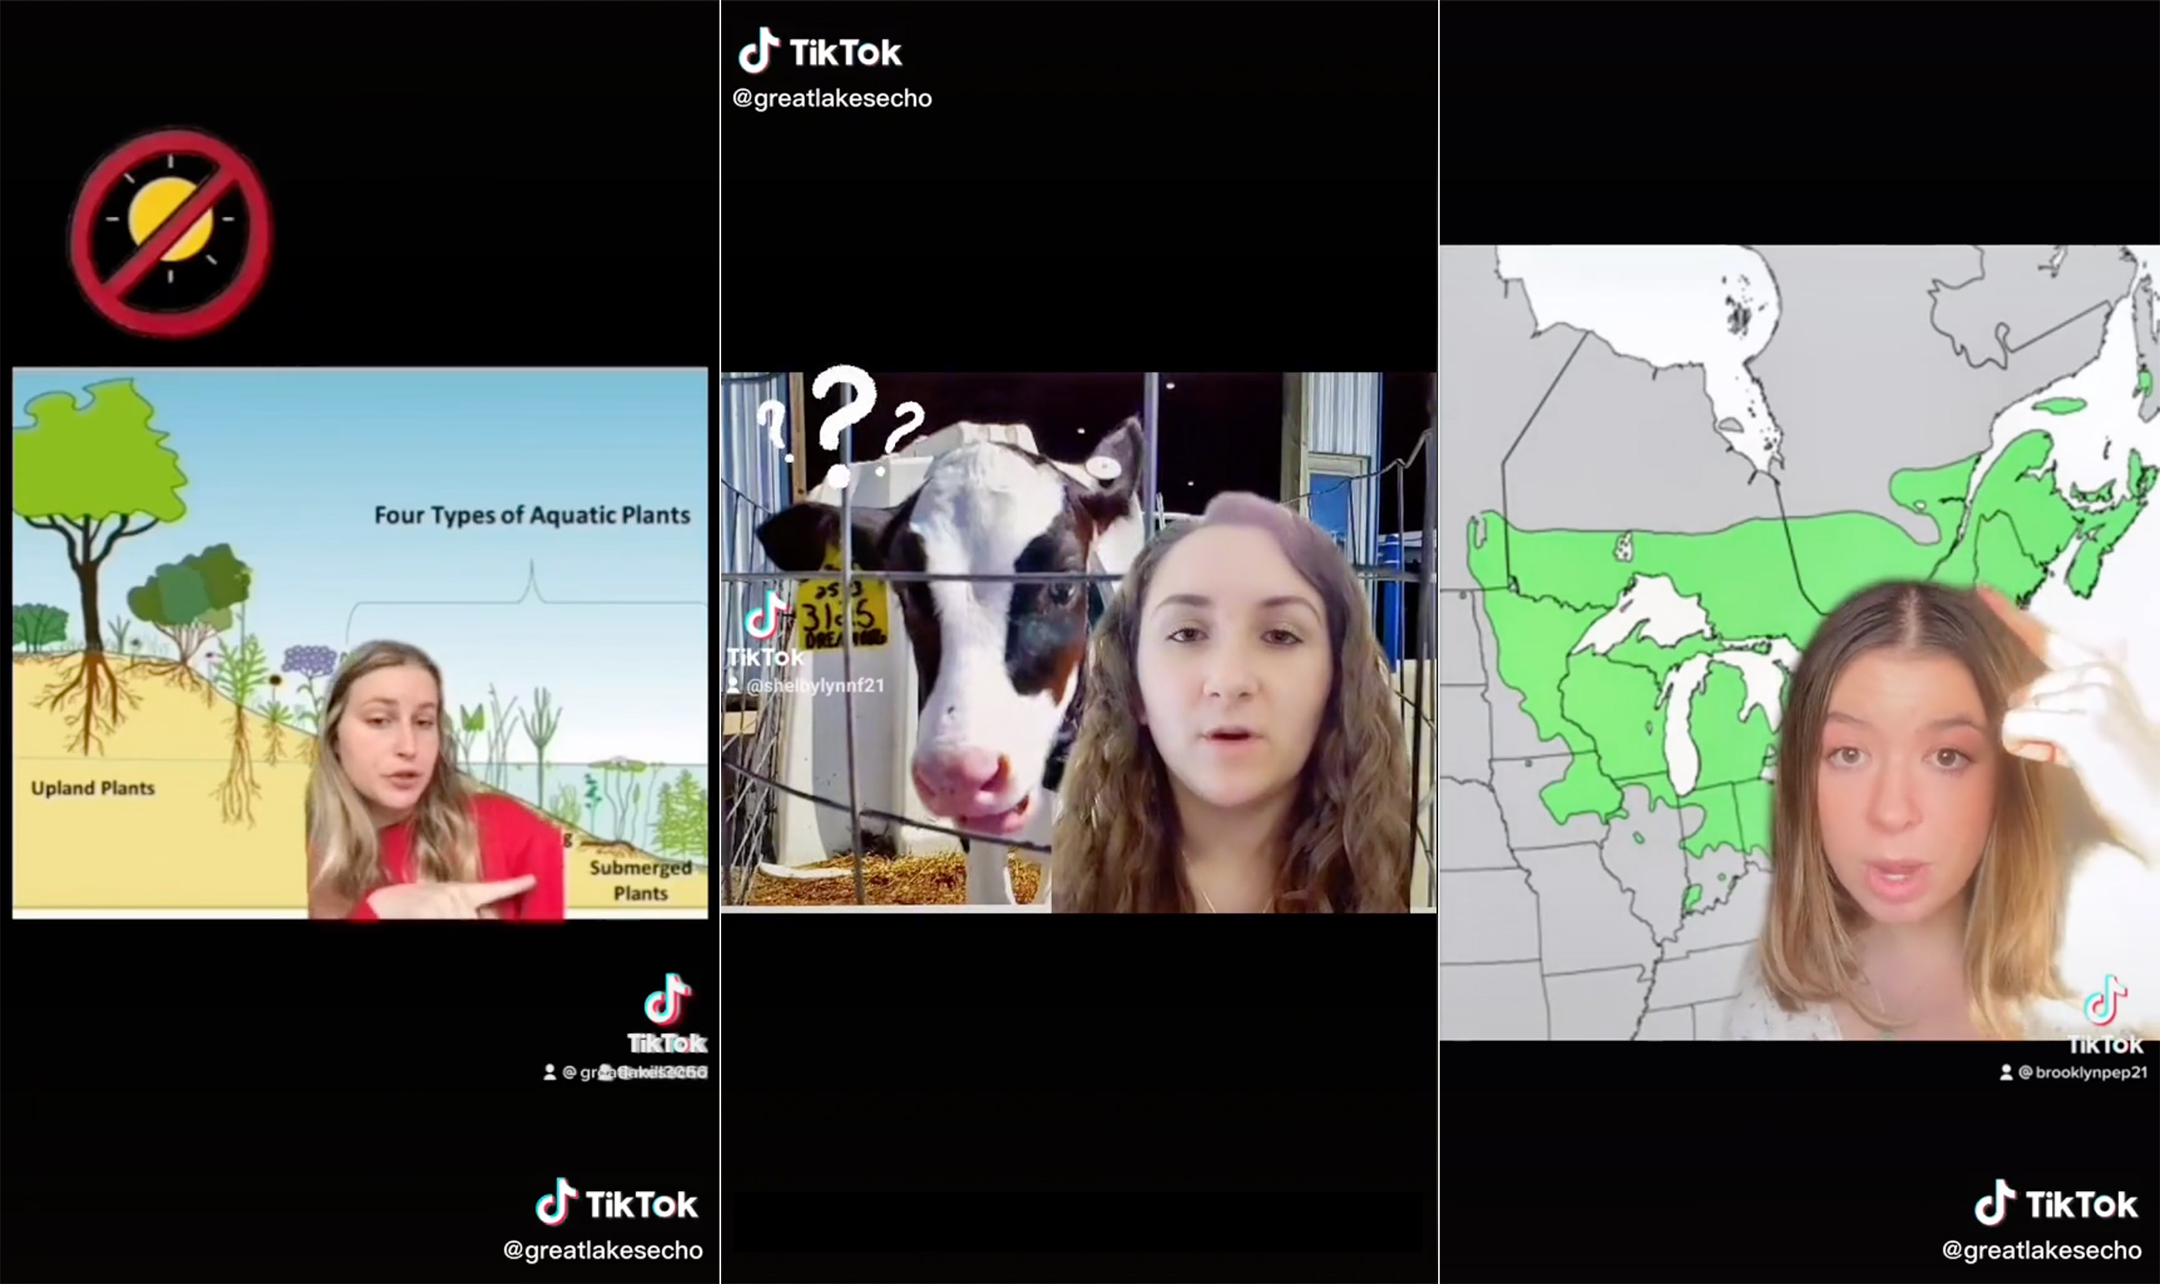 Row of three screenshots from TikTok, each showing a young woman in front of a background: diagram of a beach ecosystem on left, cows in middle, a map of the US shaded green from main to michigan and down to Missouri 